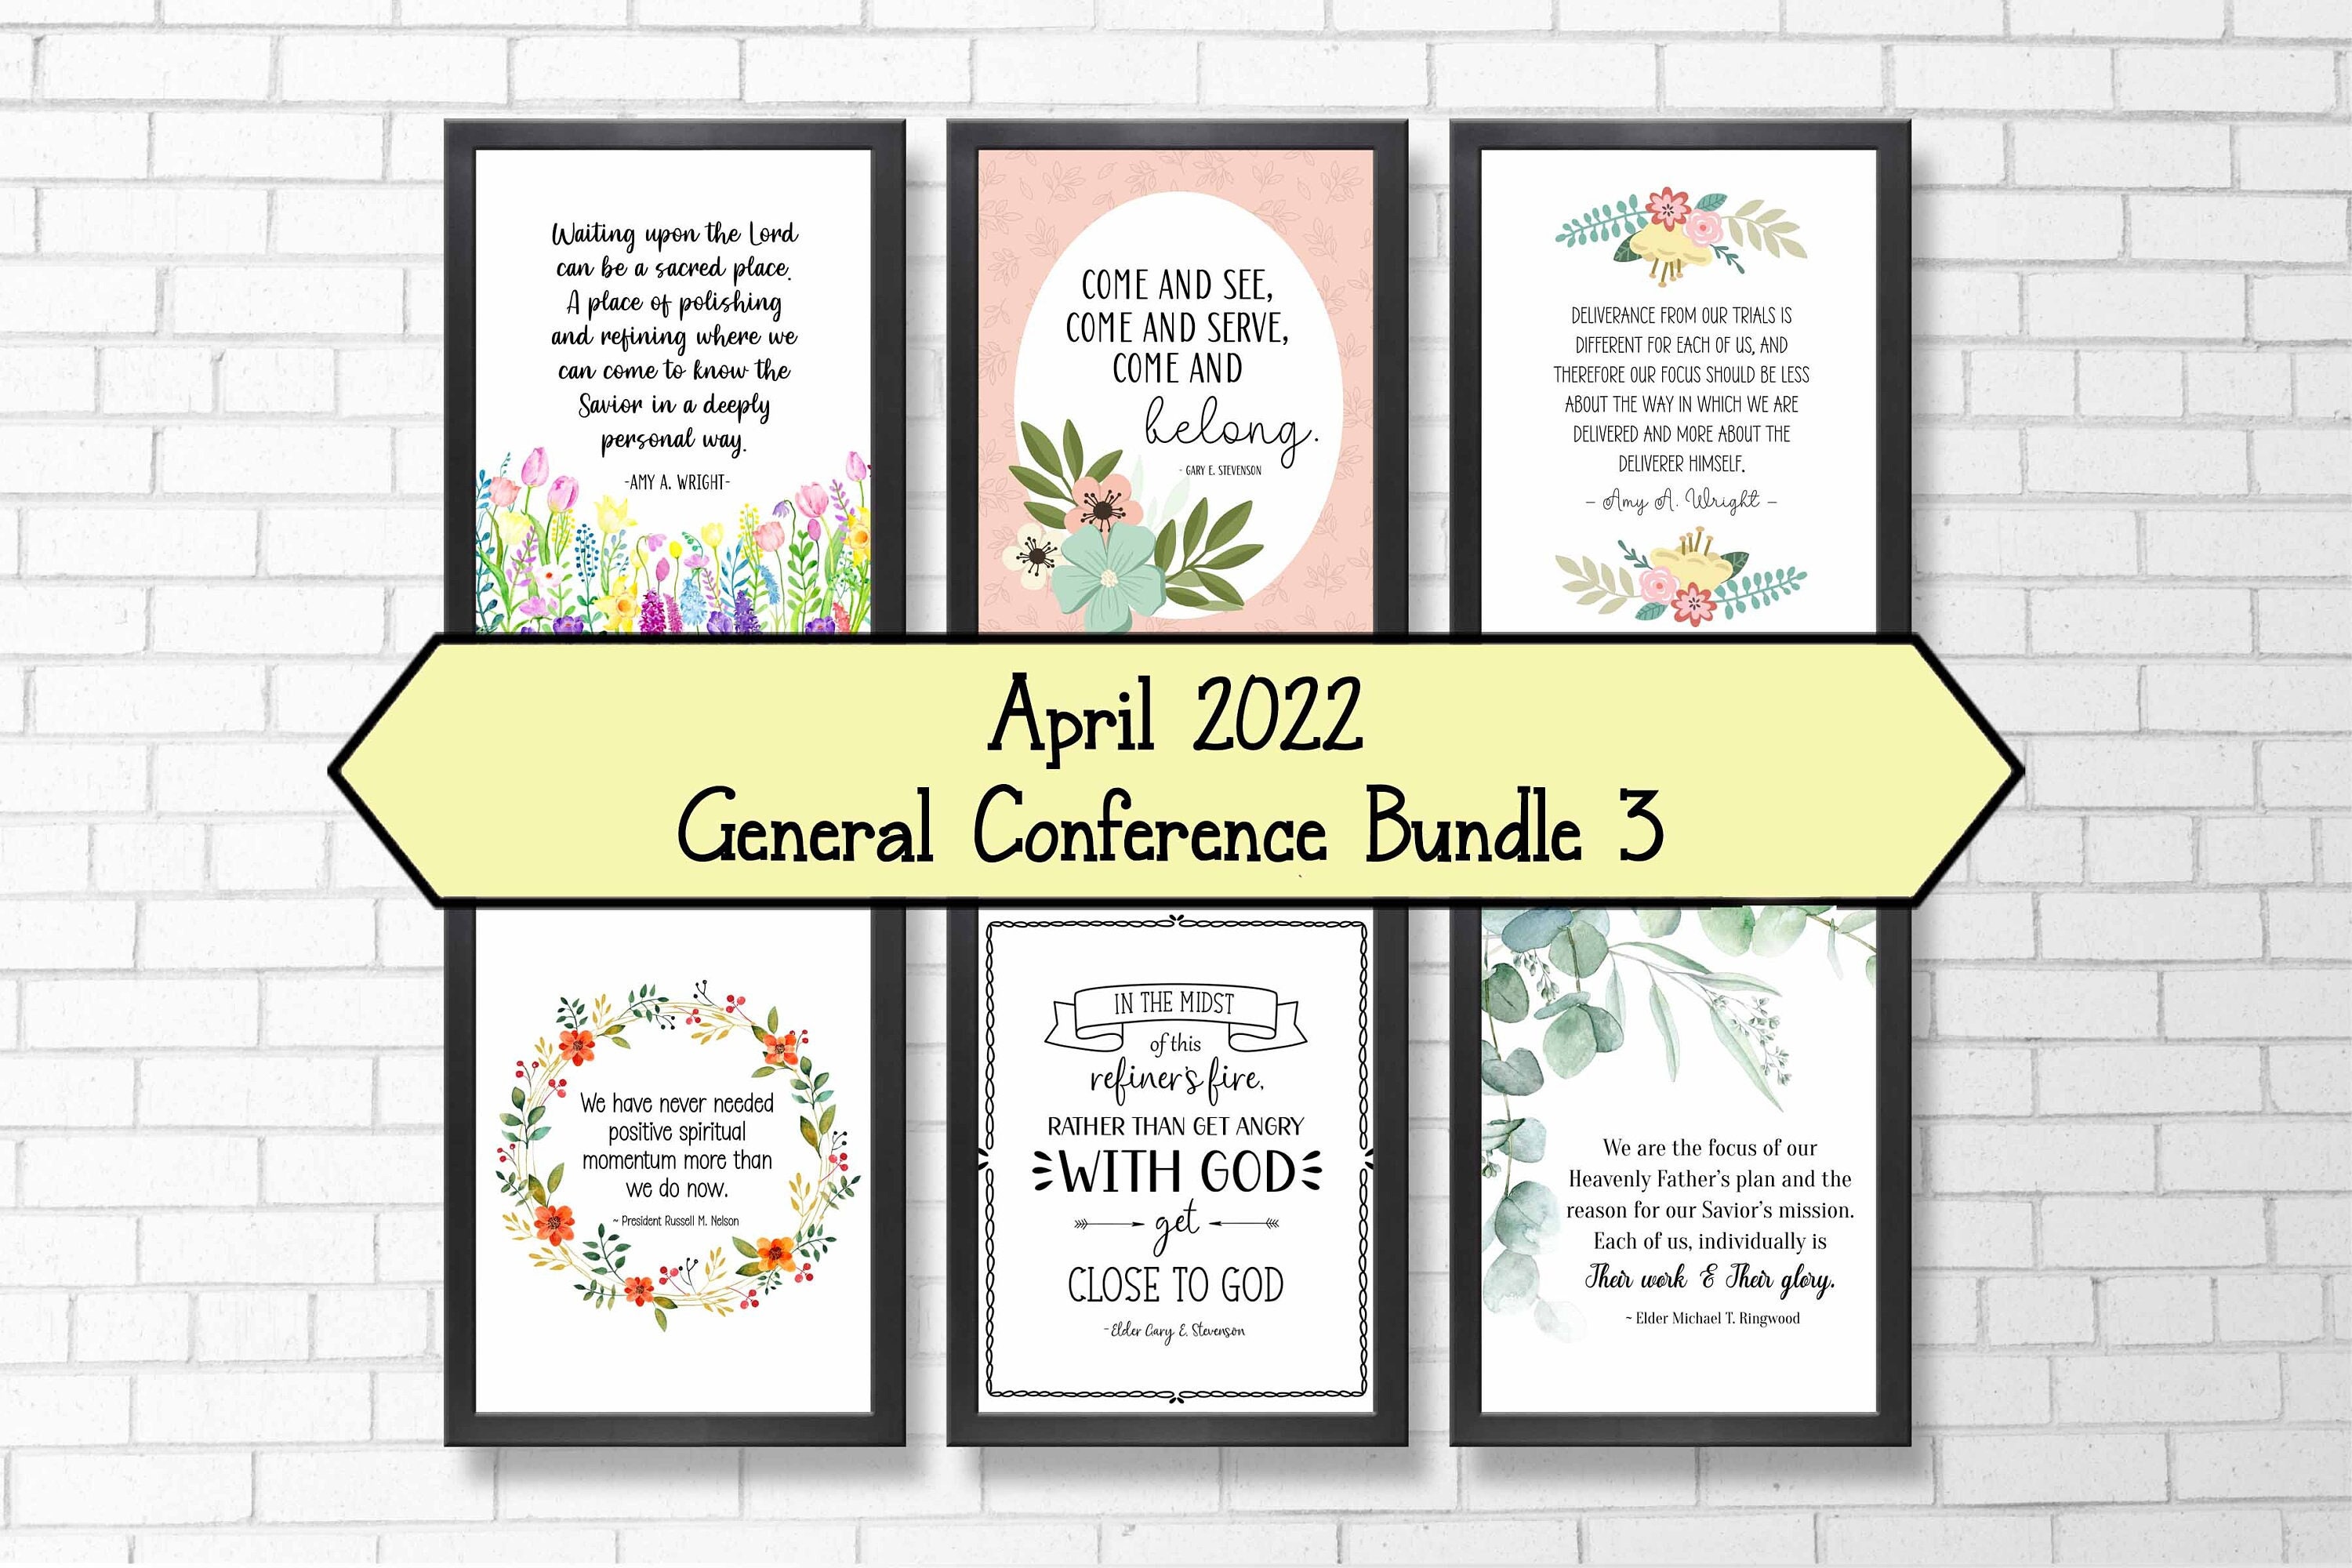 general conference 2022 schedule lds clipart